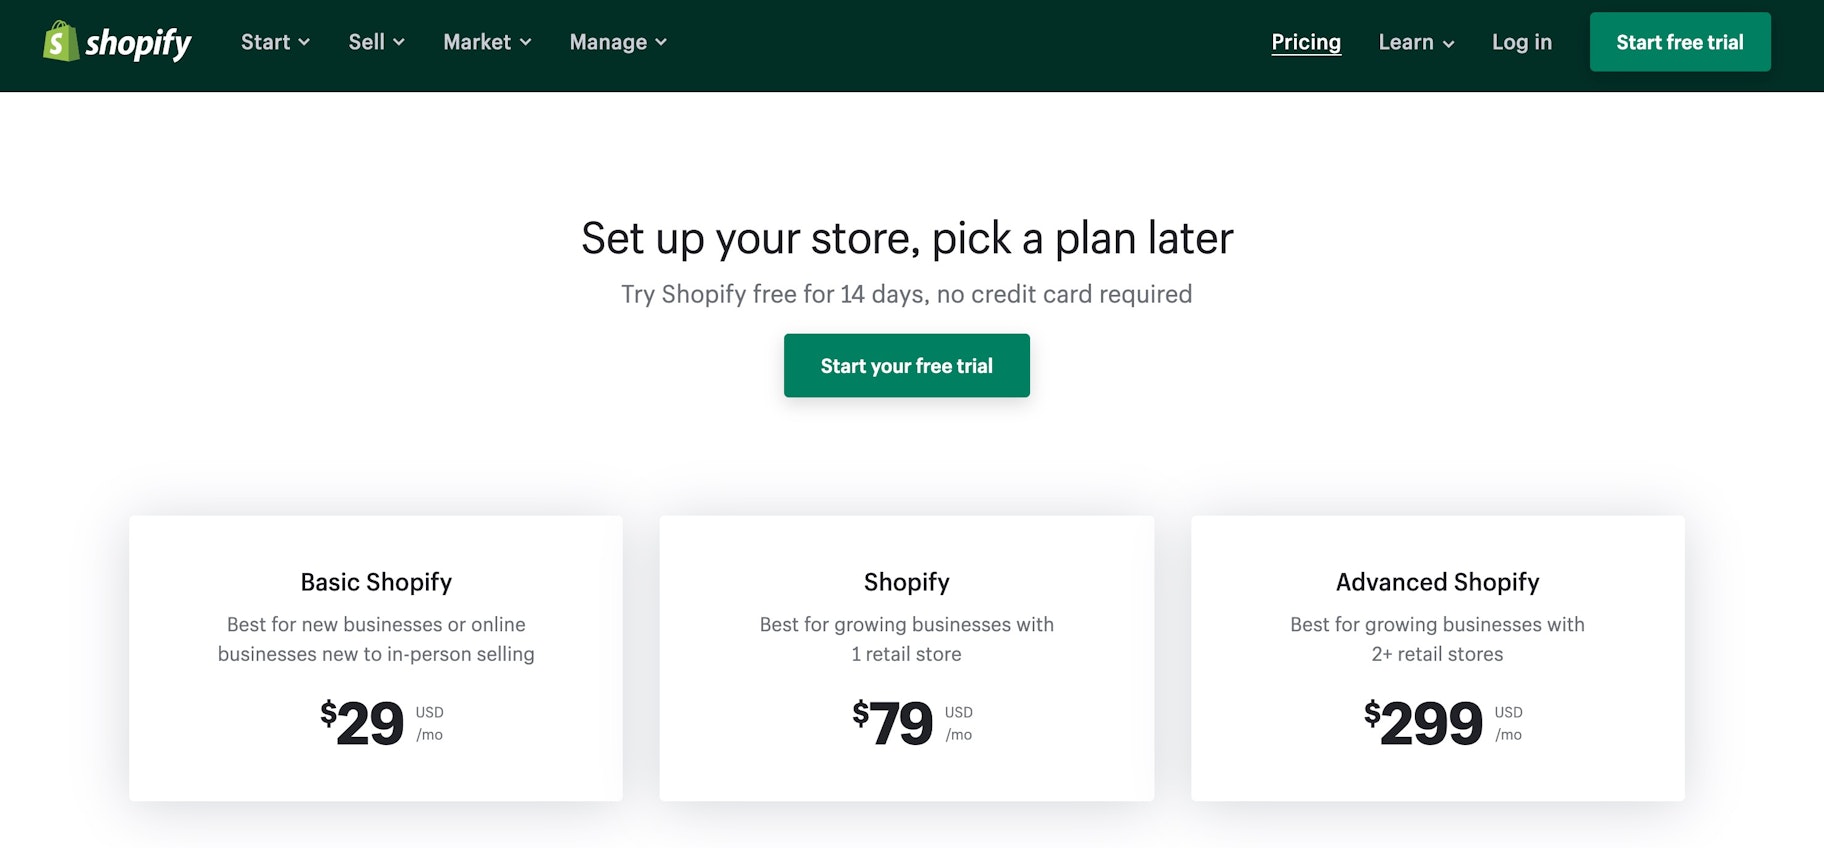 WooCommerce vs Shopify pricing